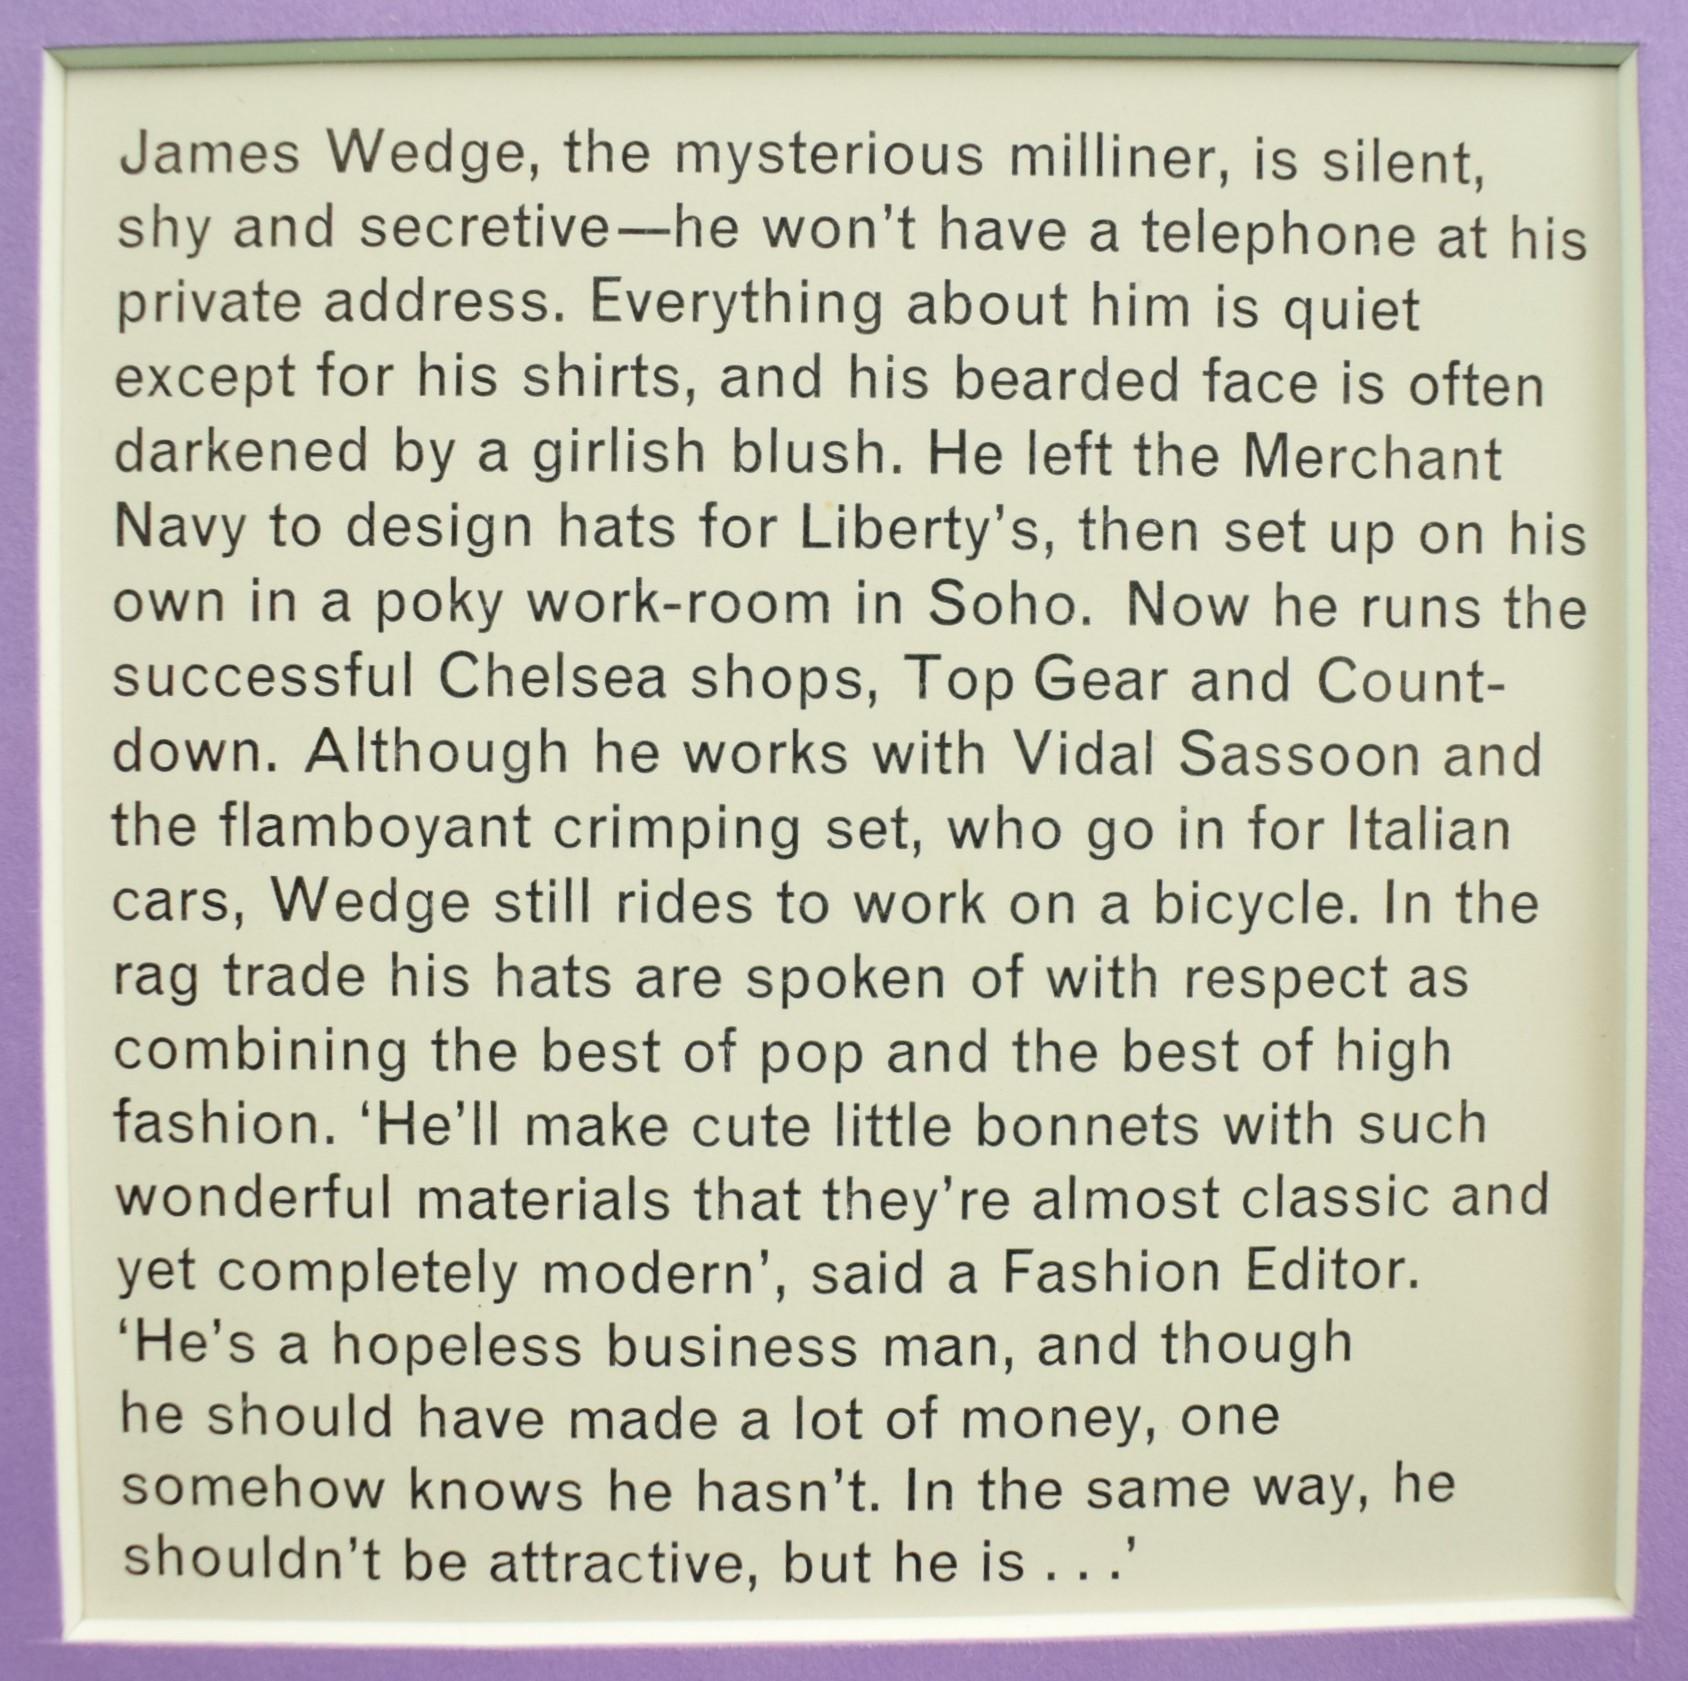 « James Wedge : The Mysterious Milliner » 1965 pour David Bailey's Box of Pin-Ups en vente 2